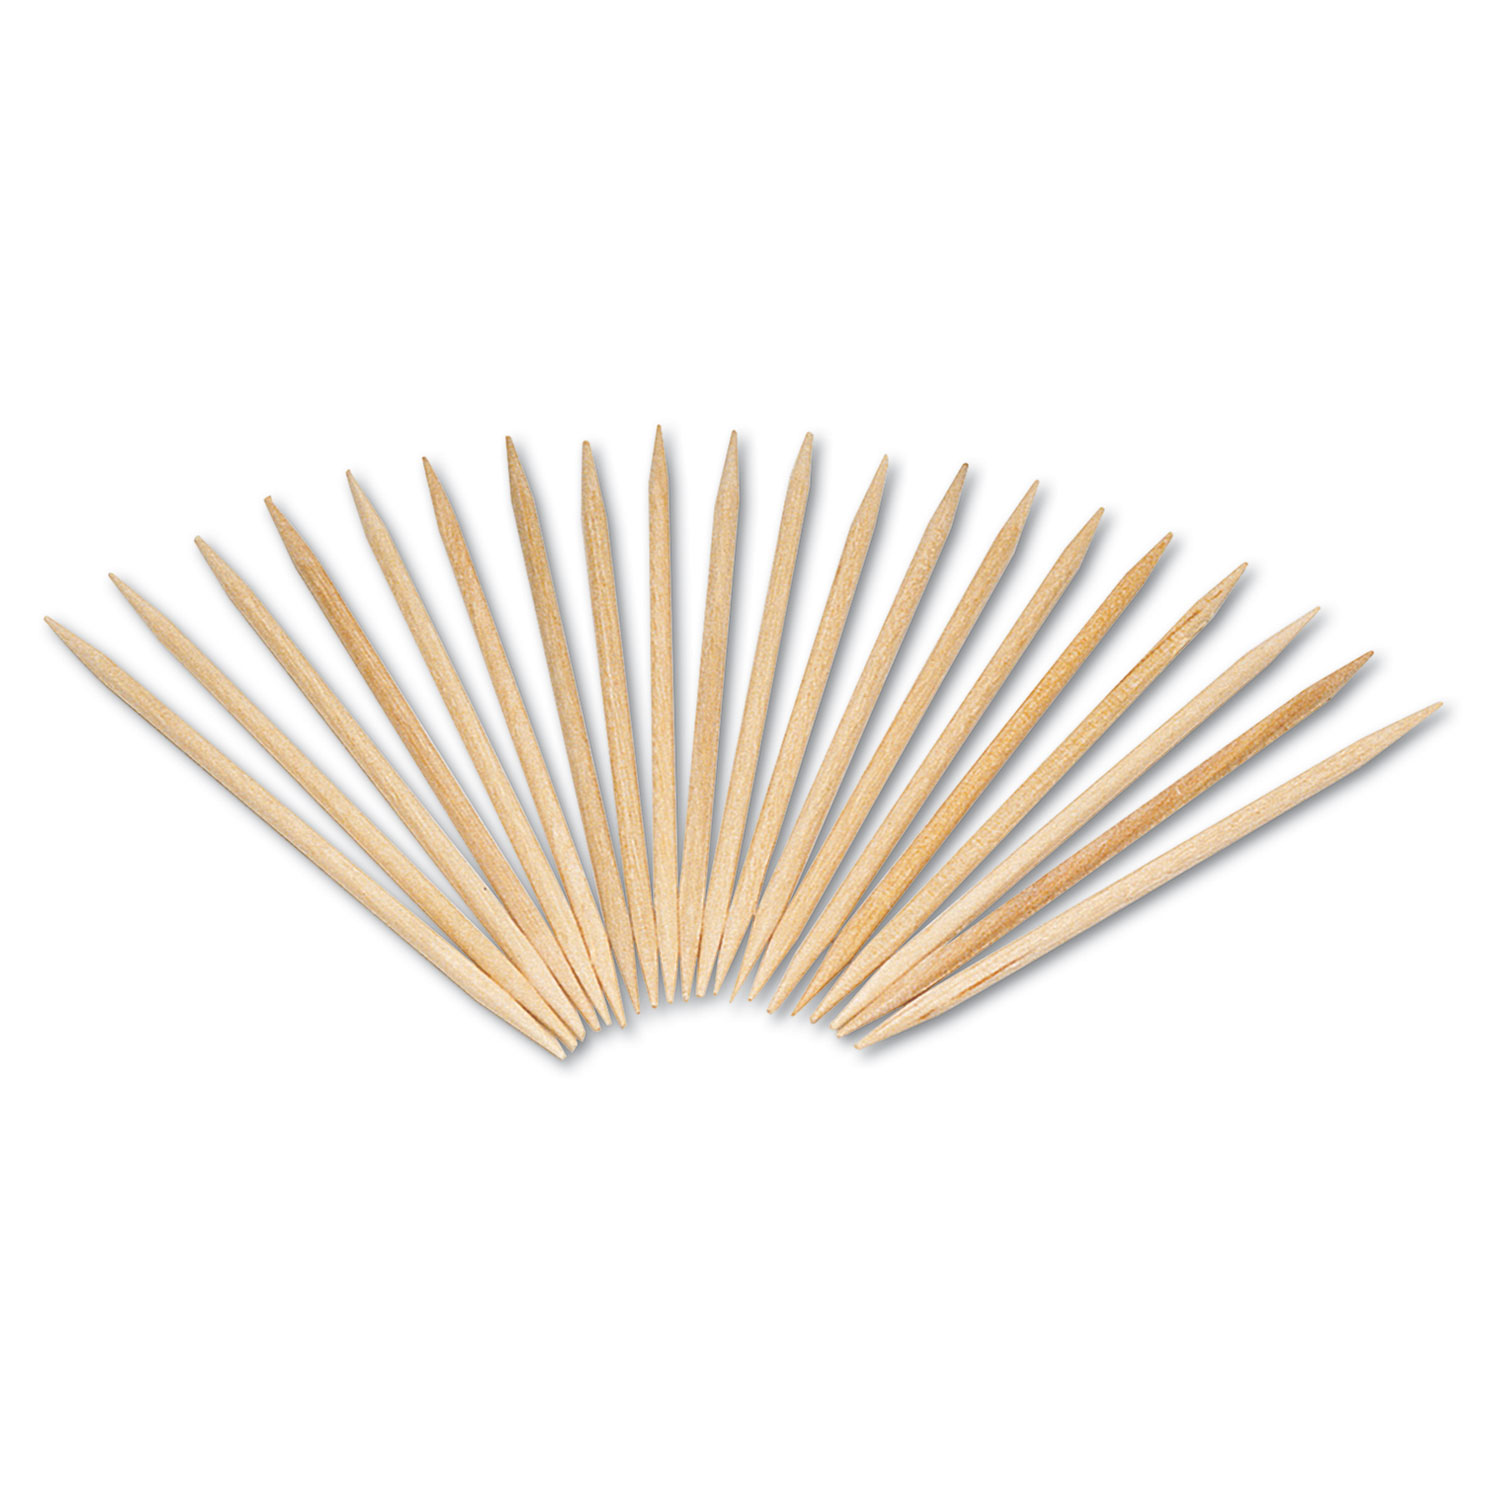  AmerCareRoyal RPP R820 Round Wood Toothpicks, 2 1/2, Natural, 24 Inner Boxes of 800, 5 Boxes/Carton, 96,000 Toothpicks/Carton (RPPR820) 